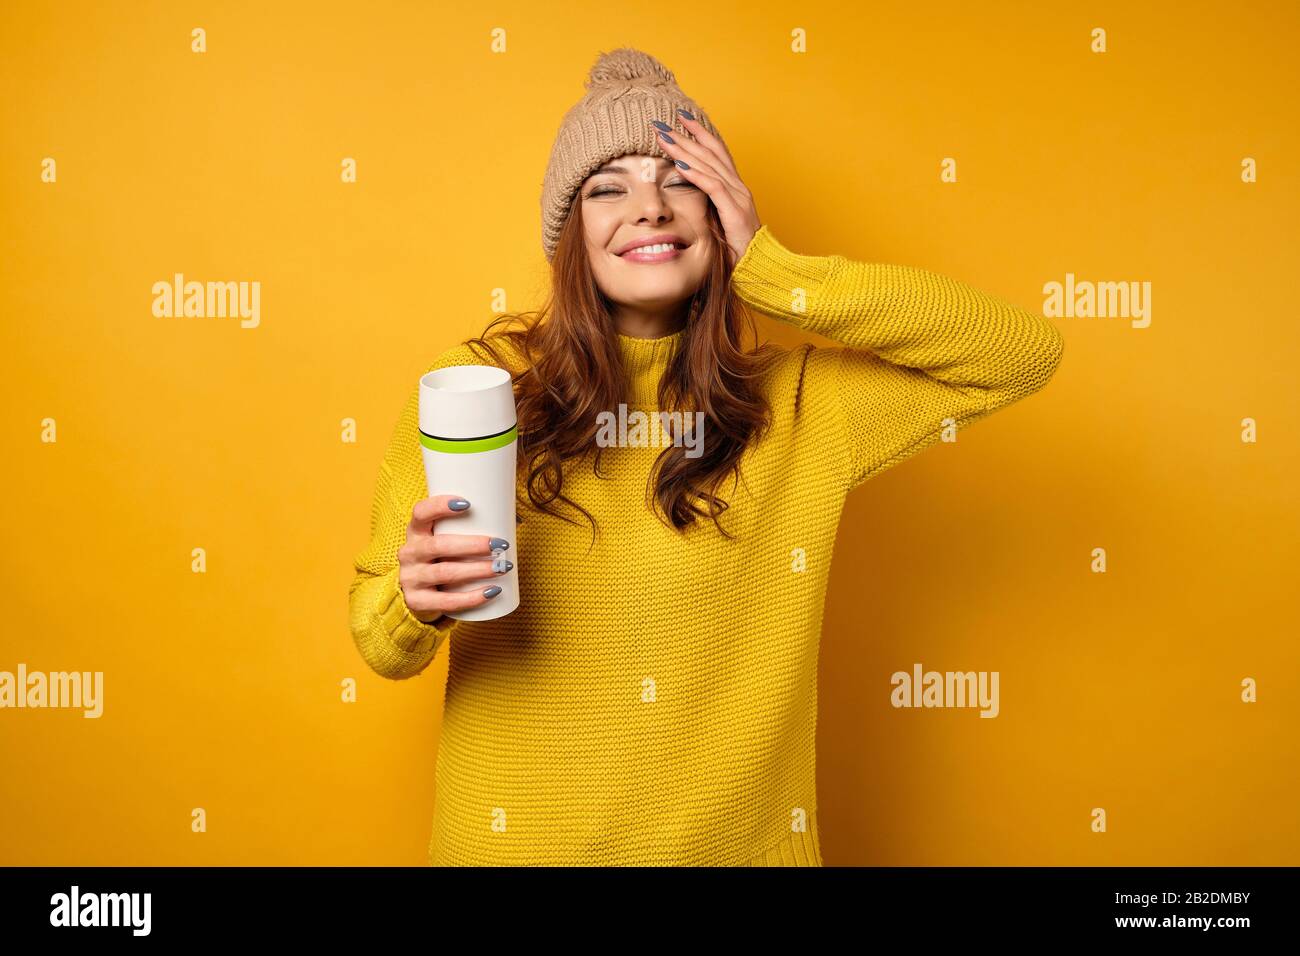 A brunette in a yellow sweater and hat is standing on a yellow background, smiling pretty with a thermocup in her hands. Stock Photo